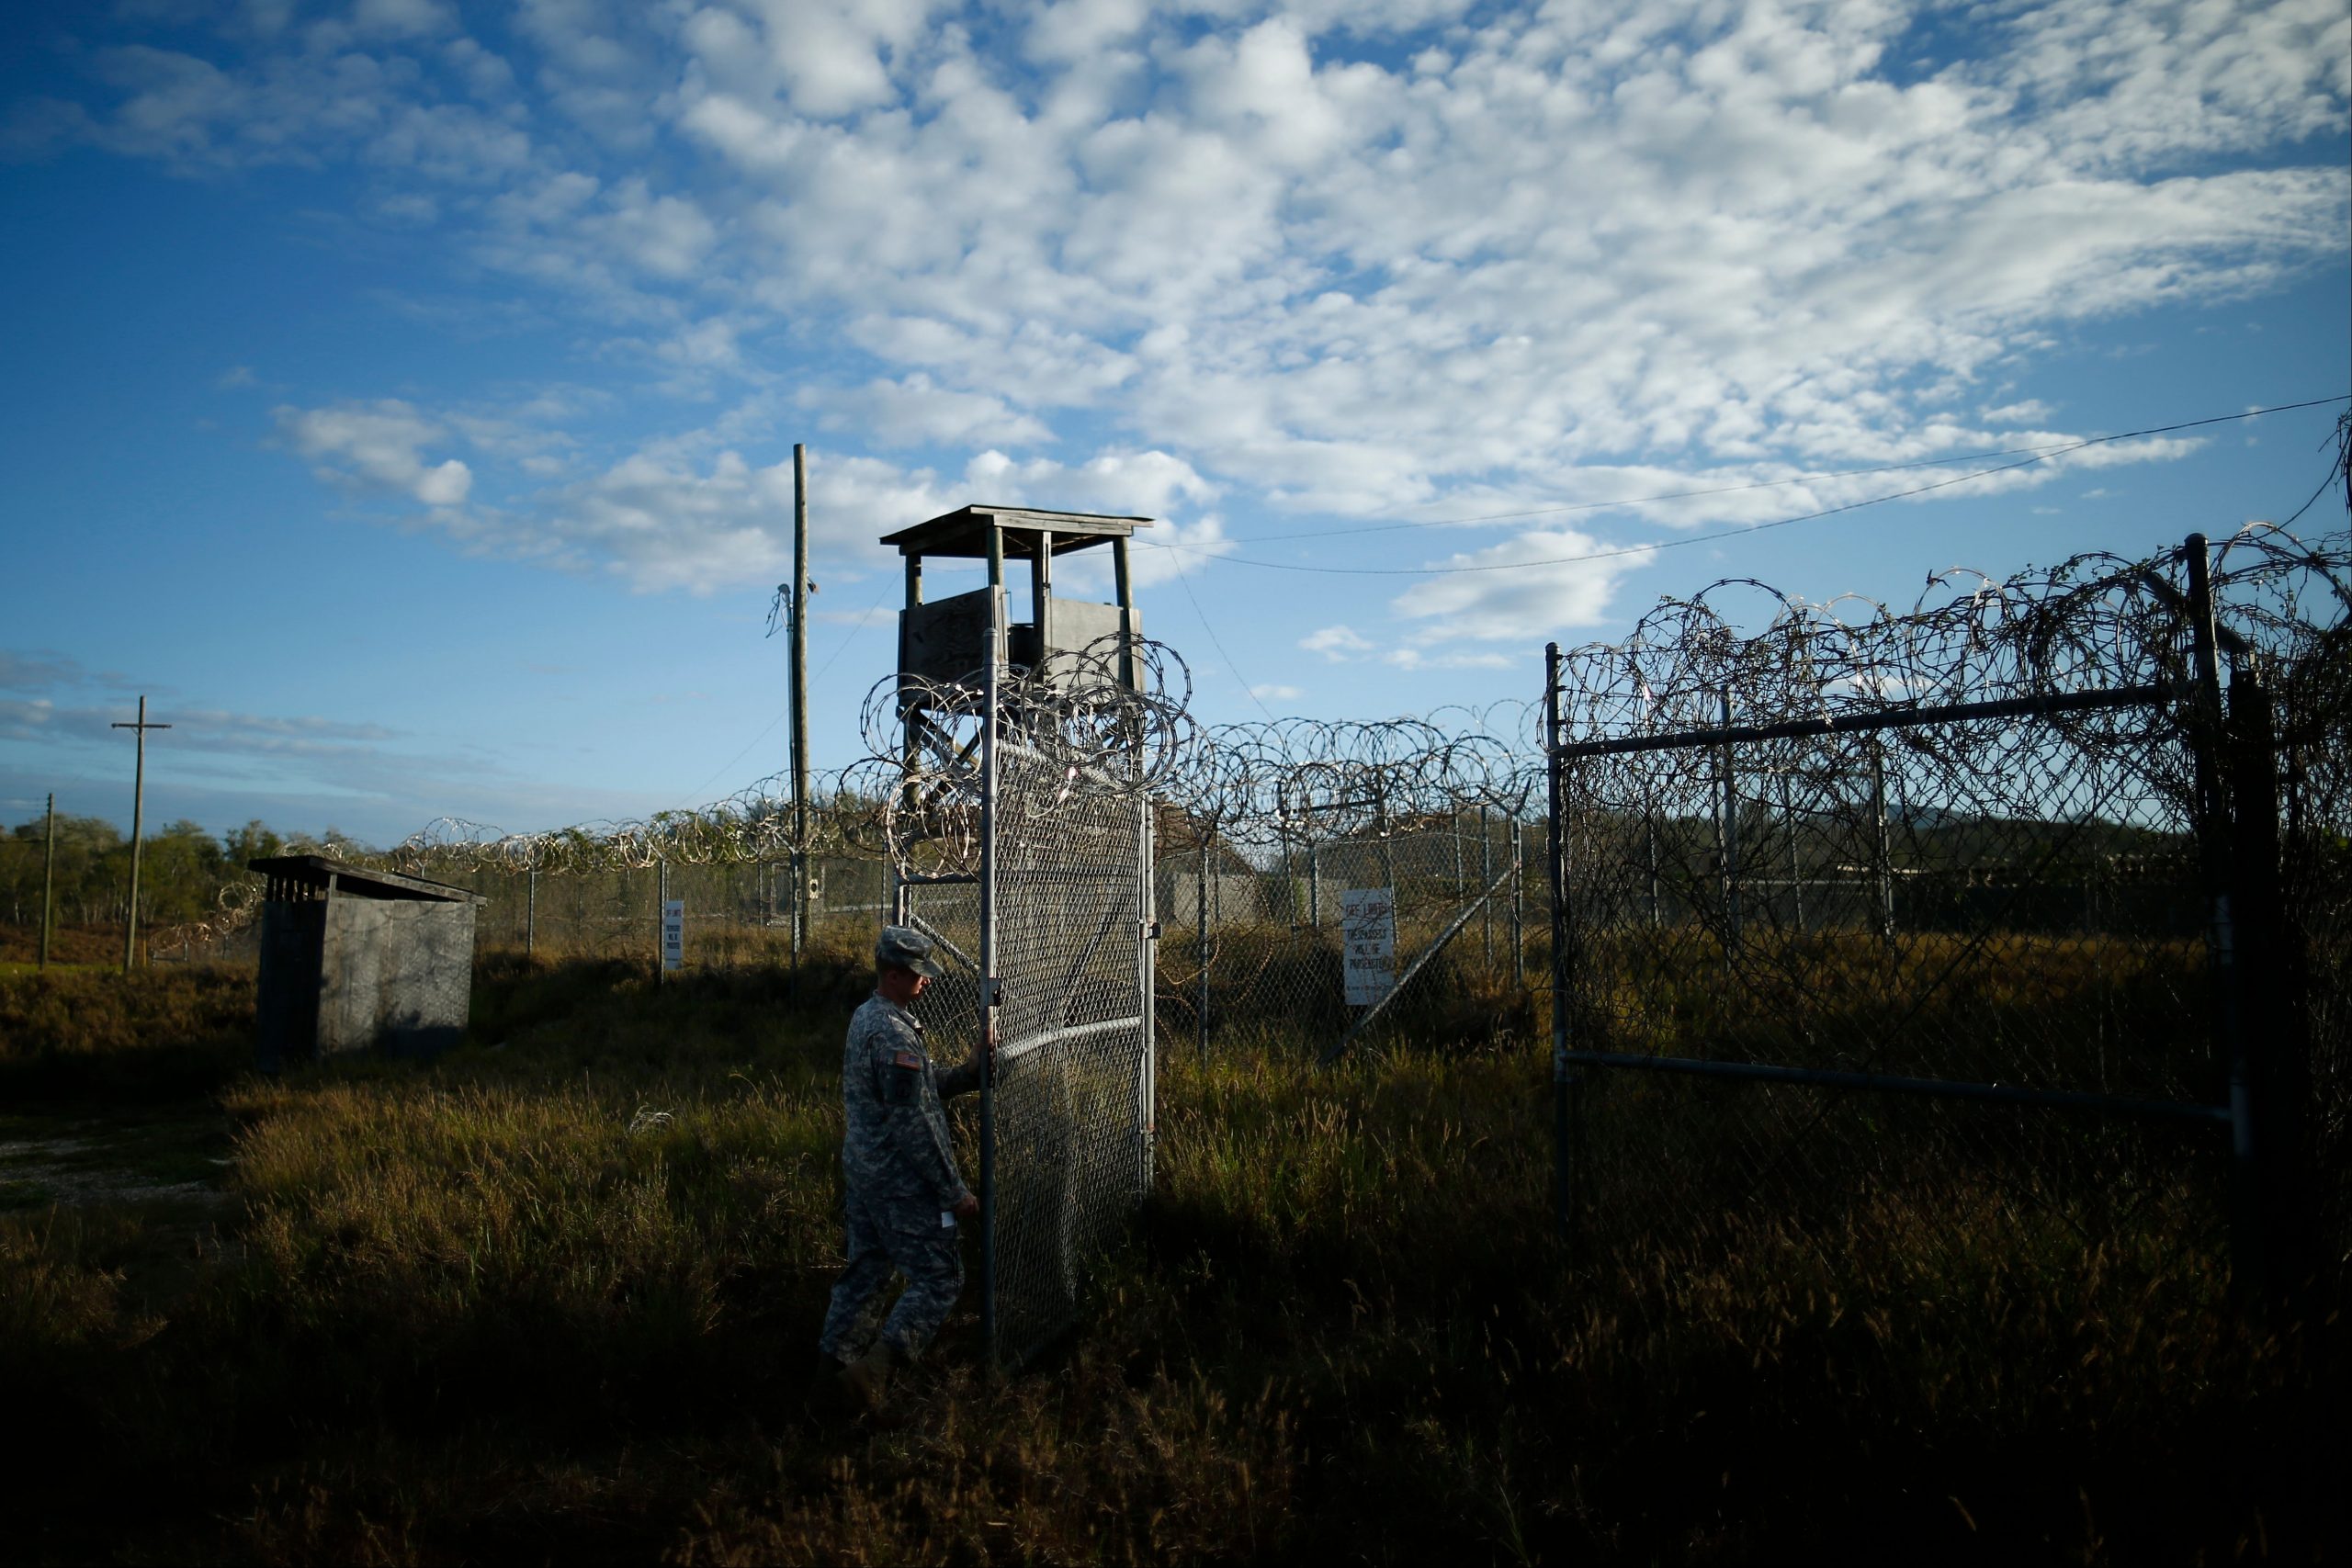 Guantanamo Bay prison: Another unresolved legacy of 9/11 after Afghanistan